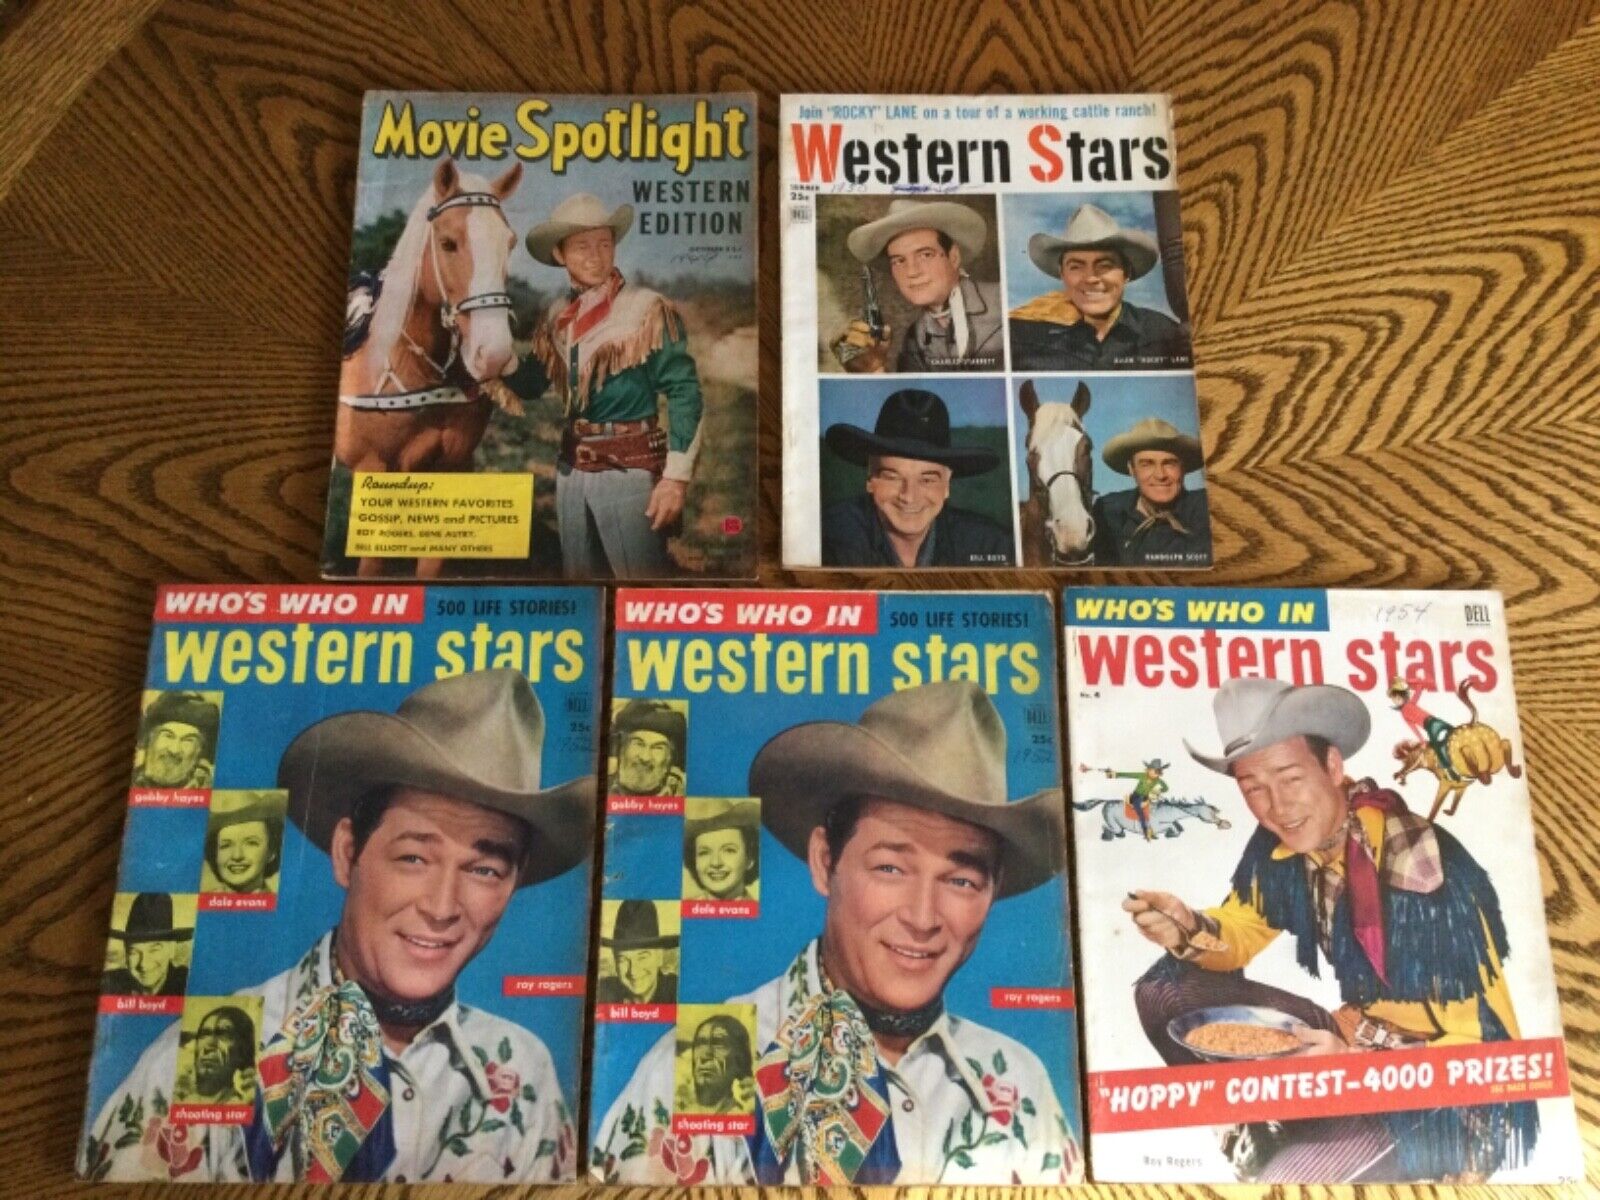 Safety and trust 1949-54 MOVIE SPOTLIGHT WESTERN STARS LOT Fair New product OF MAGAZINES 5